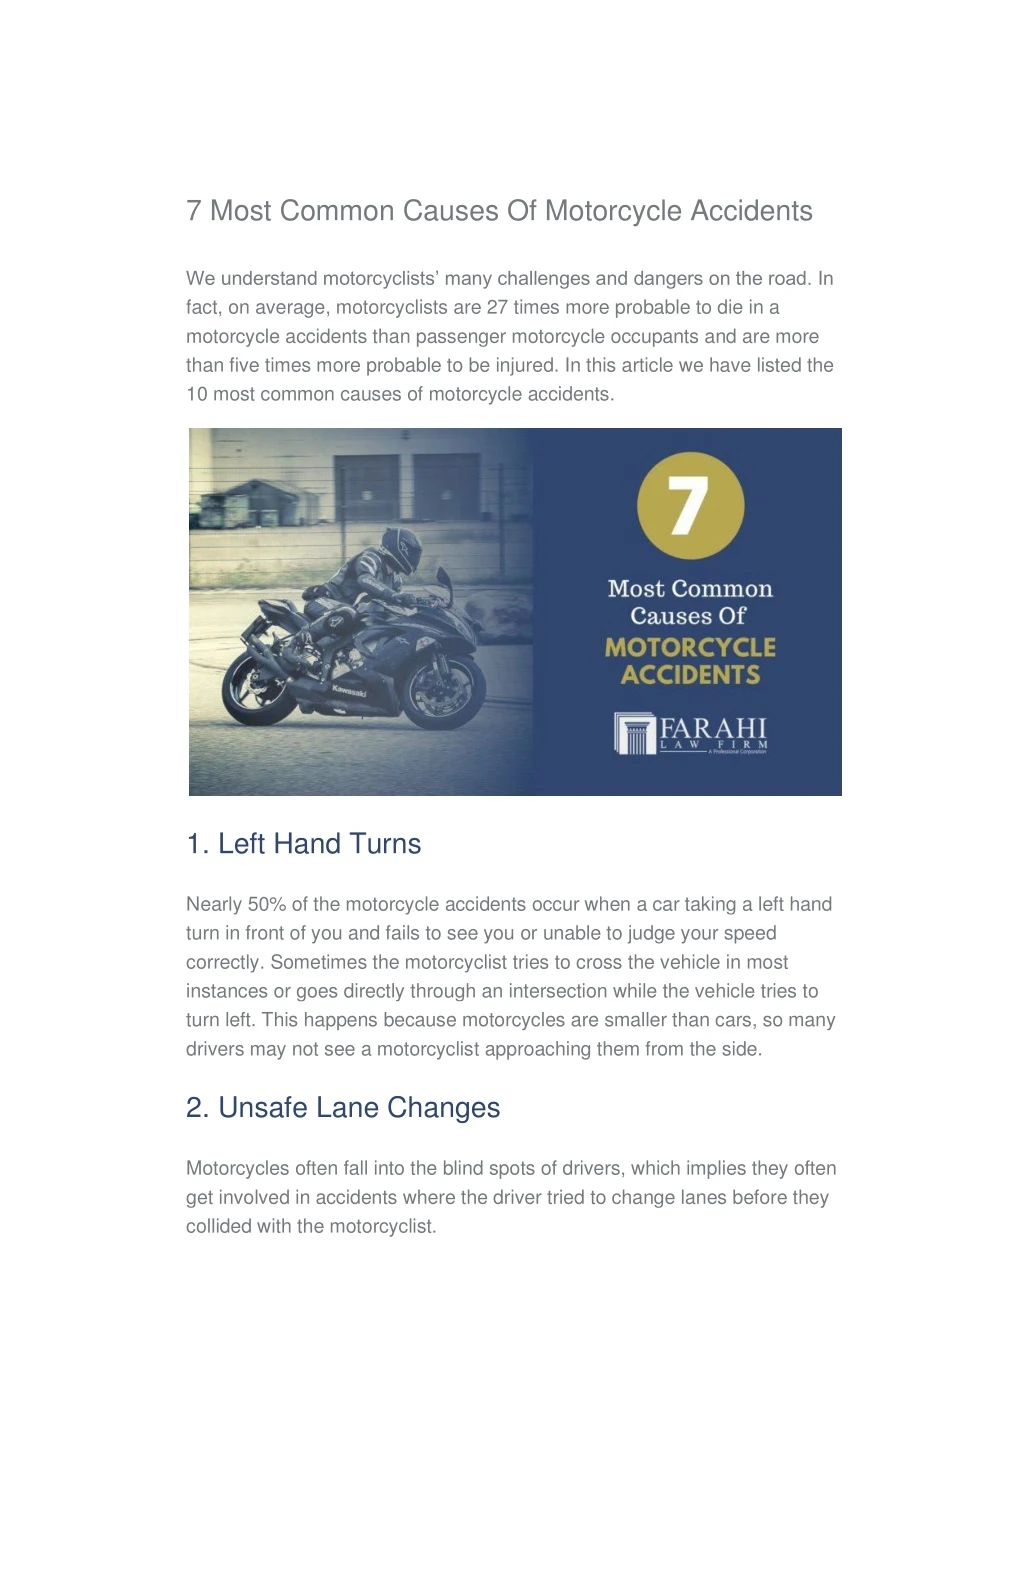 7 most common causes of motorcycle accidents